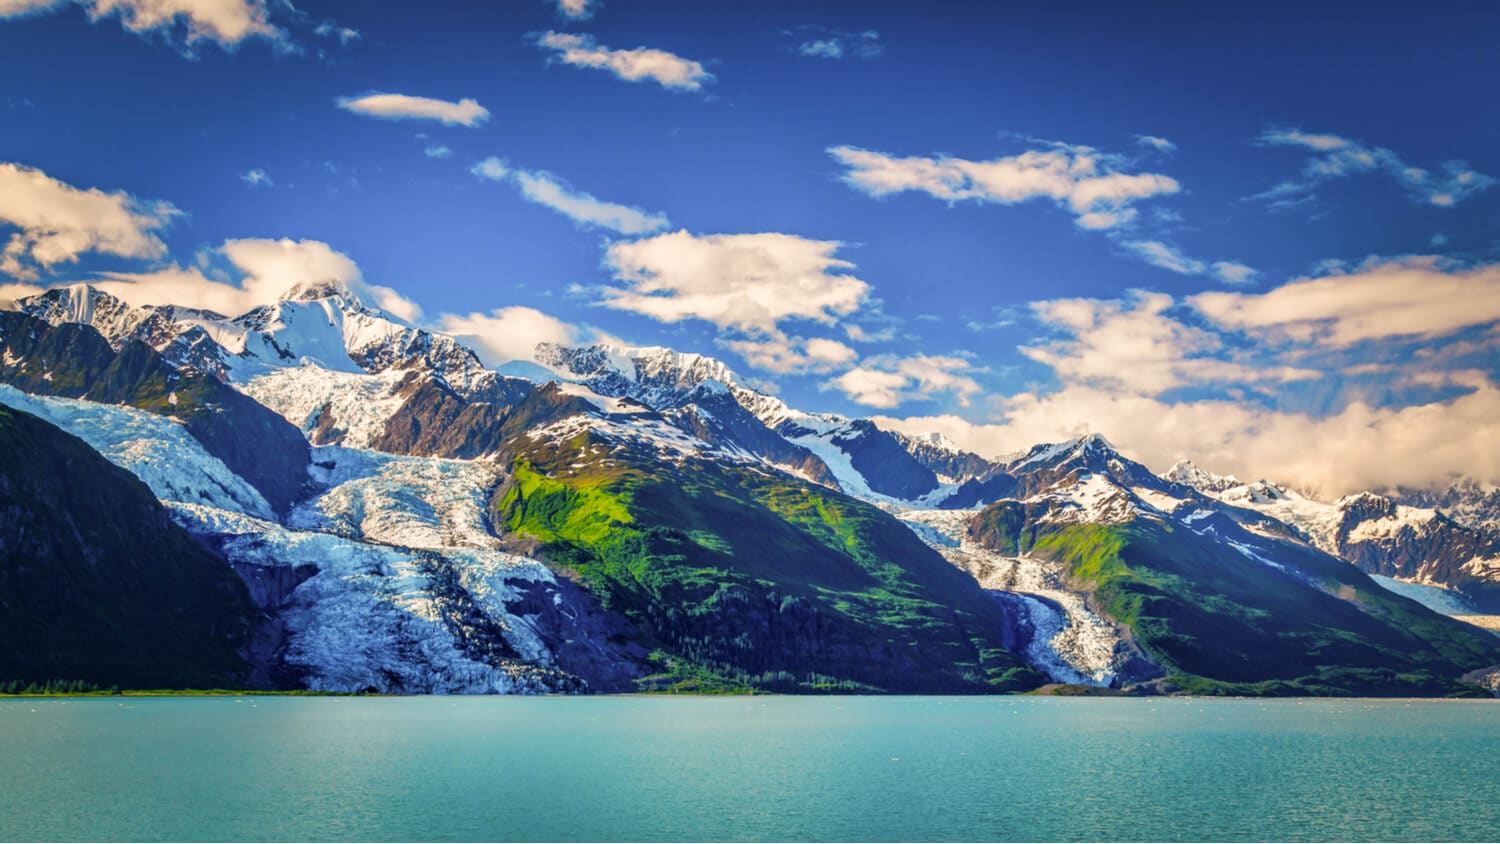 A glacier rises from the shore of a emerald-hued lake.